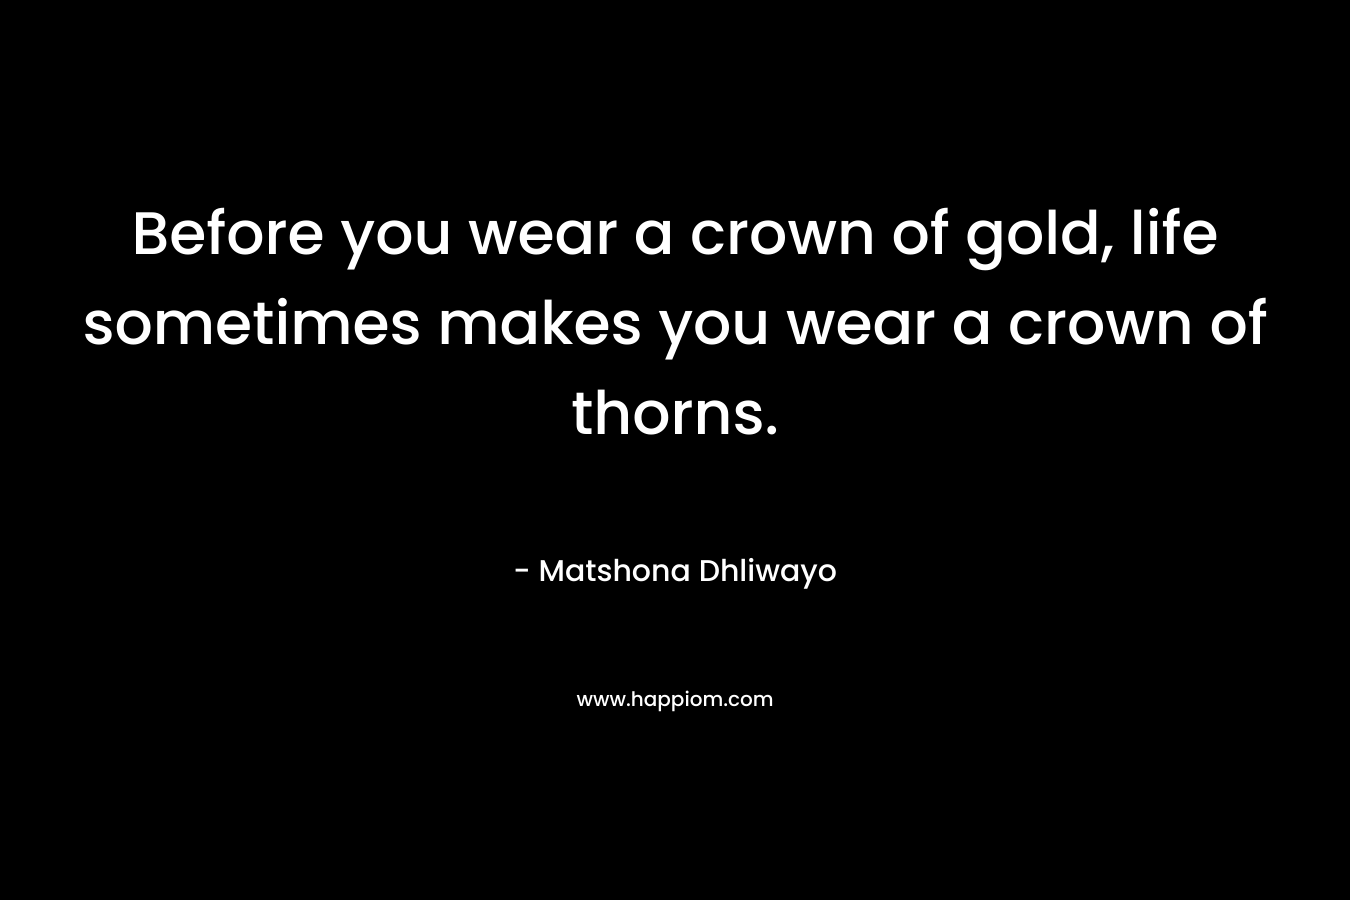 Before you wear a crown of gold, life sometimes makes you wear a crown of thorns.